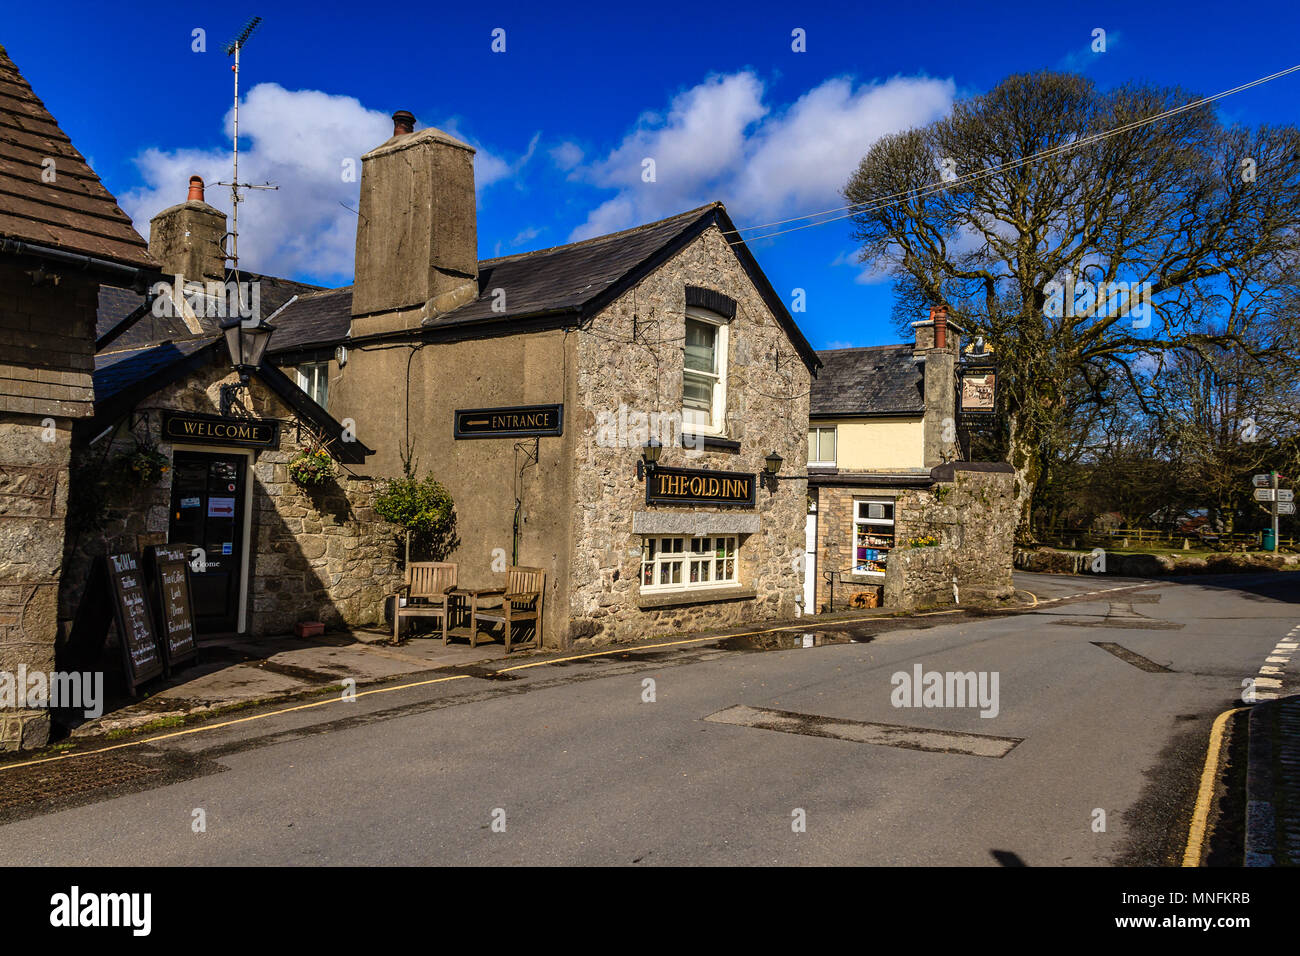 Street view of the Old Inn pub, Widecombe in the Moor, Dartmoor, Devon. March 2018. Stock Photo